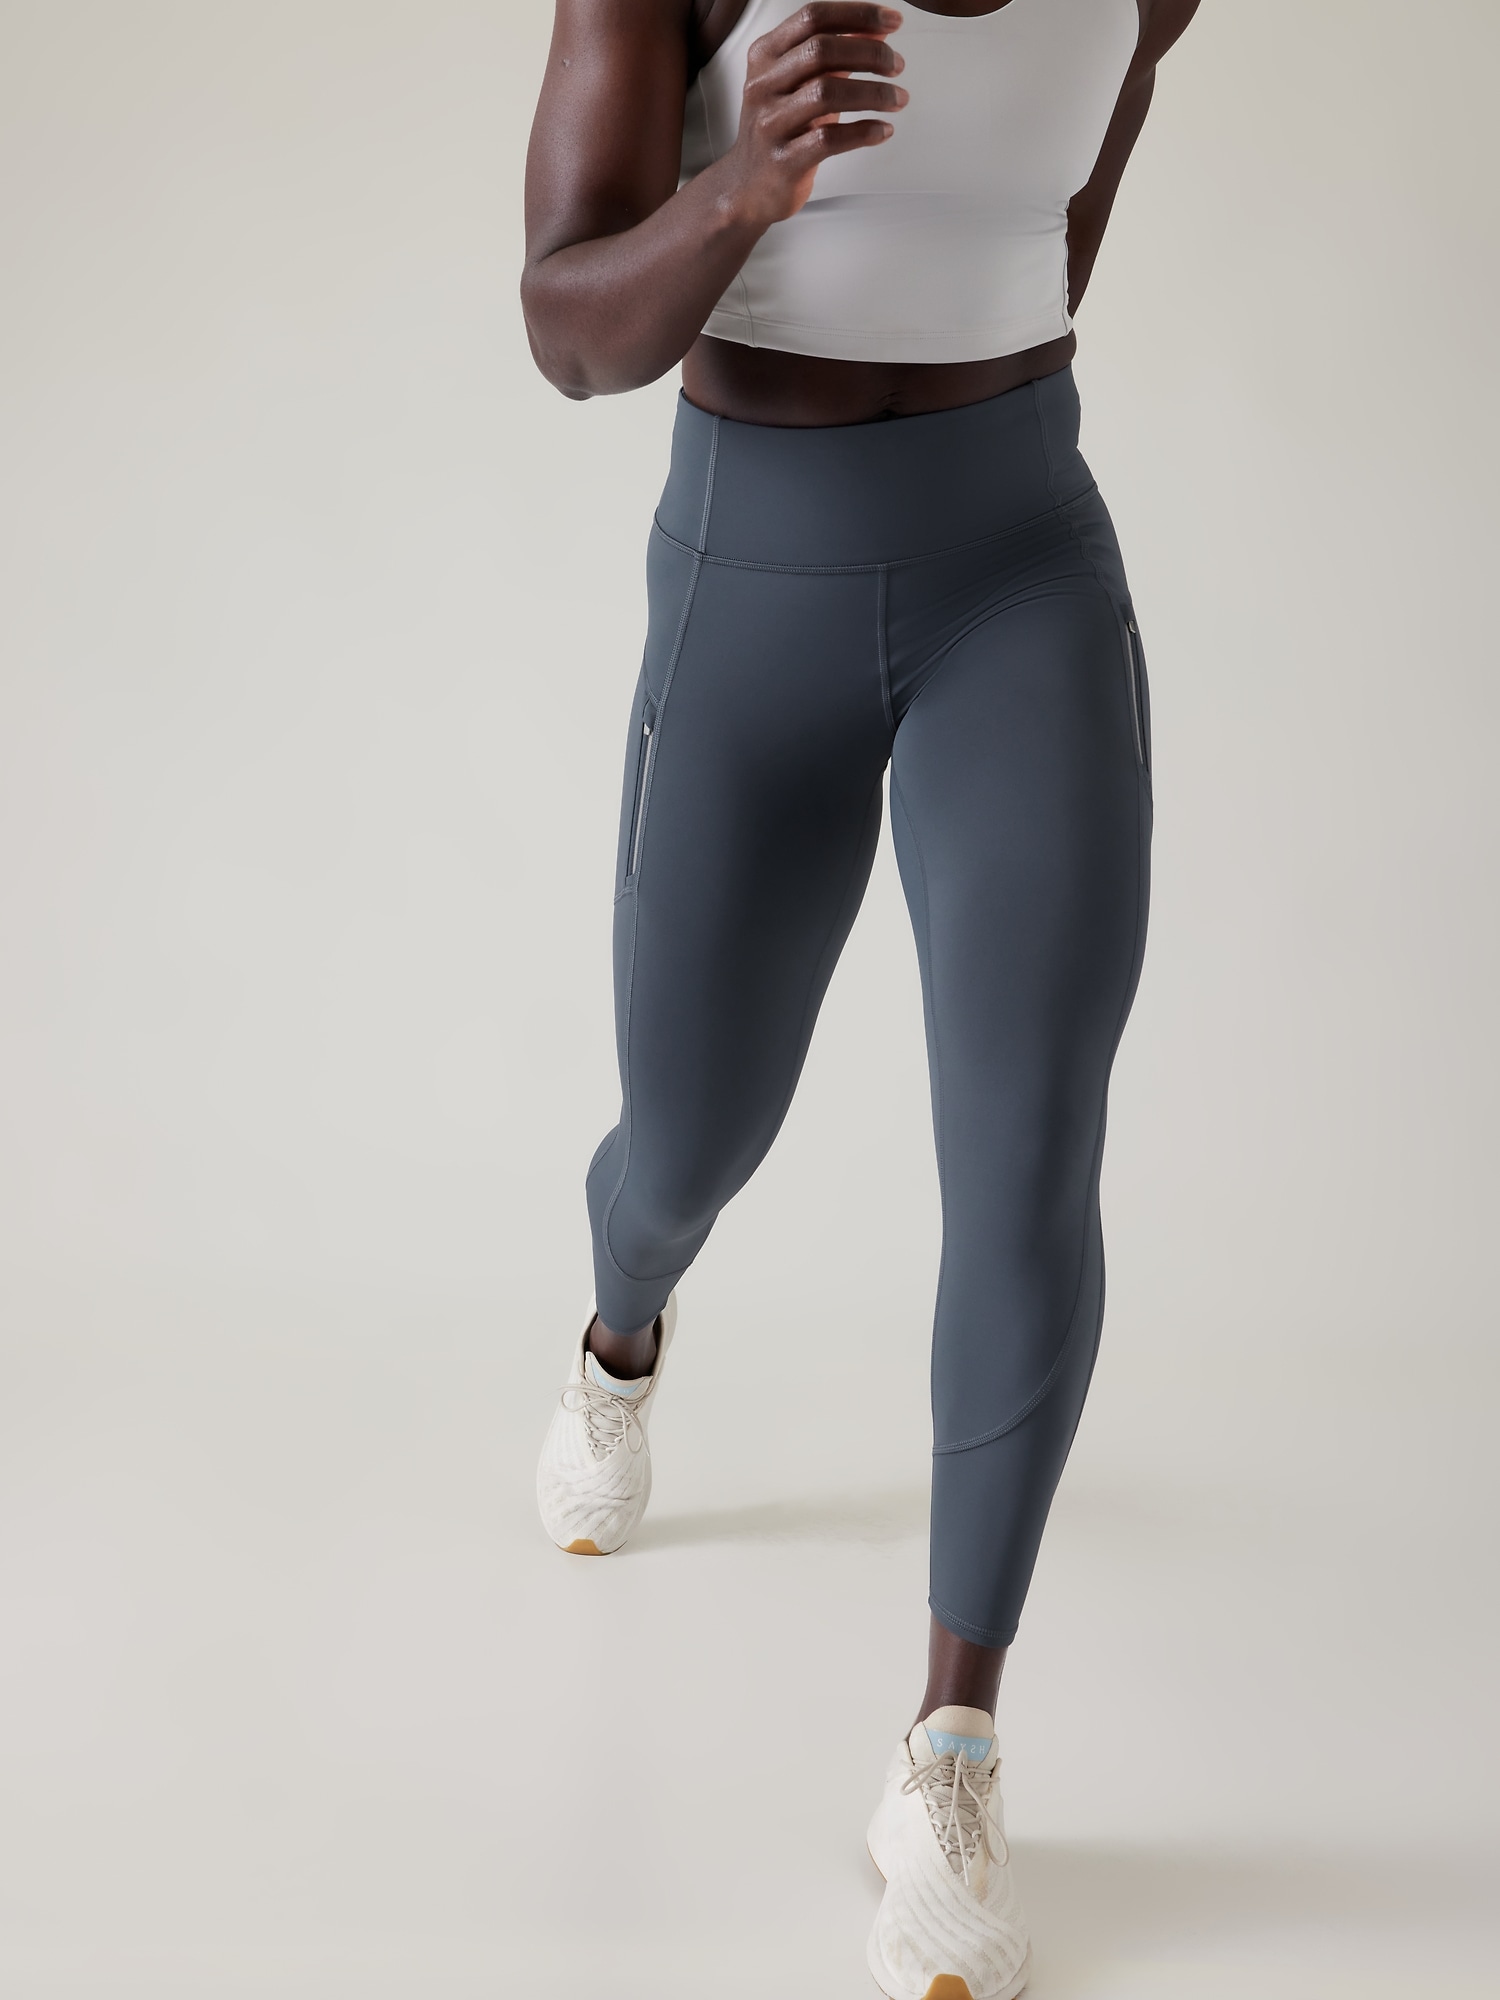 JHNFGGTyjk Athleta Leggings for Women Autumn And Winter Nude Yoga